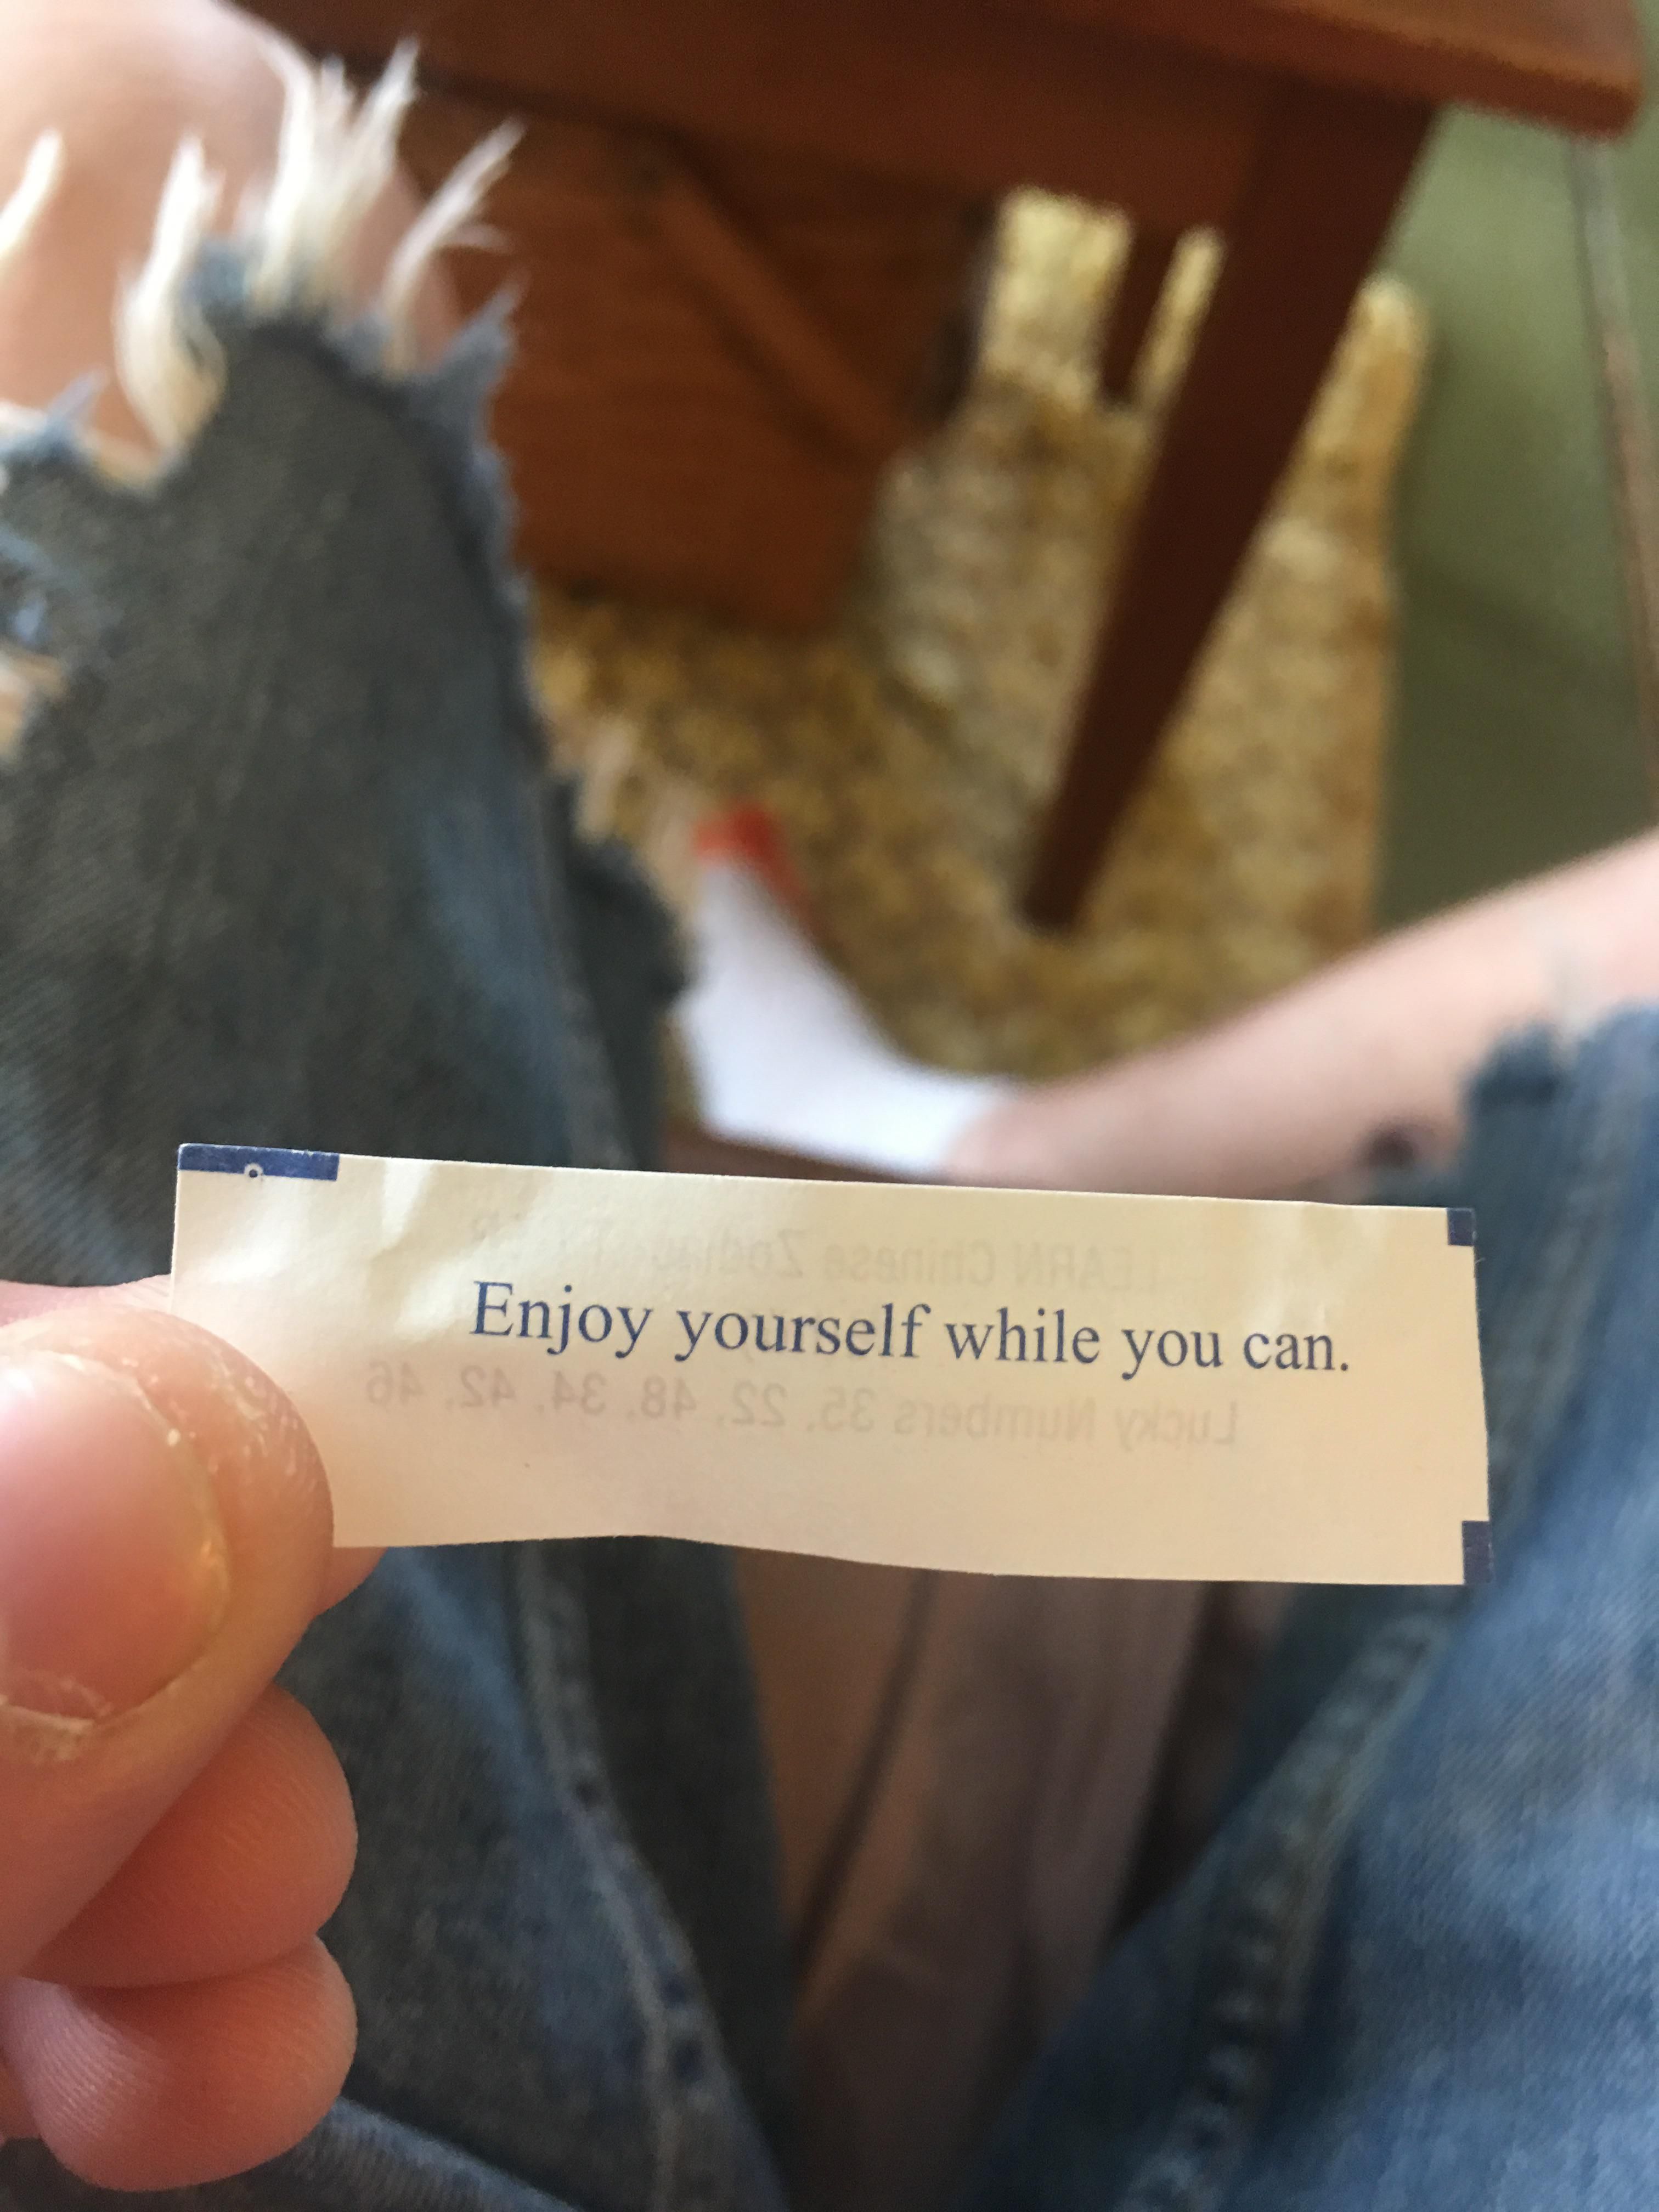 Did my fortune cookie just threaten me?